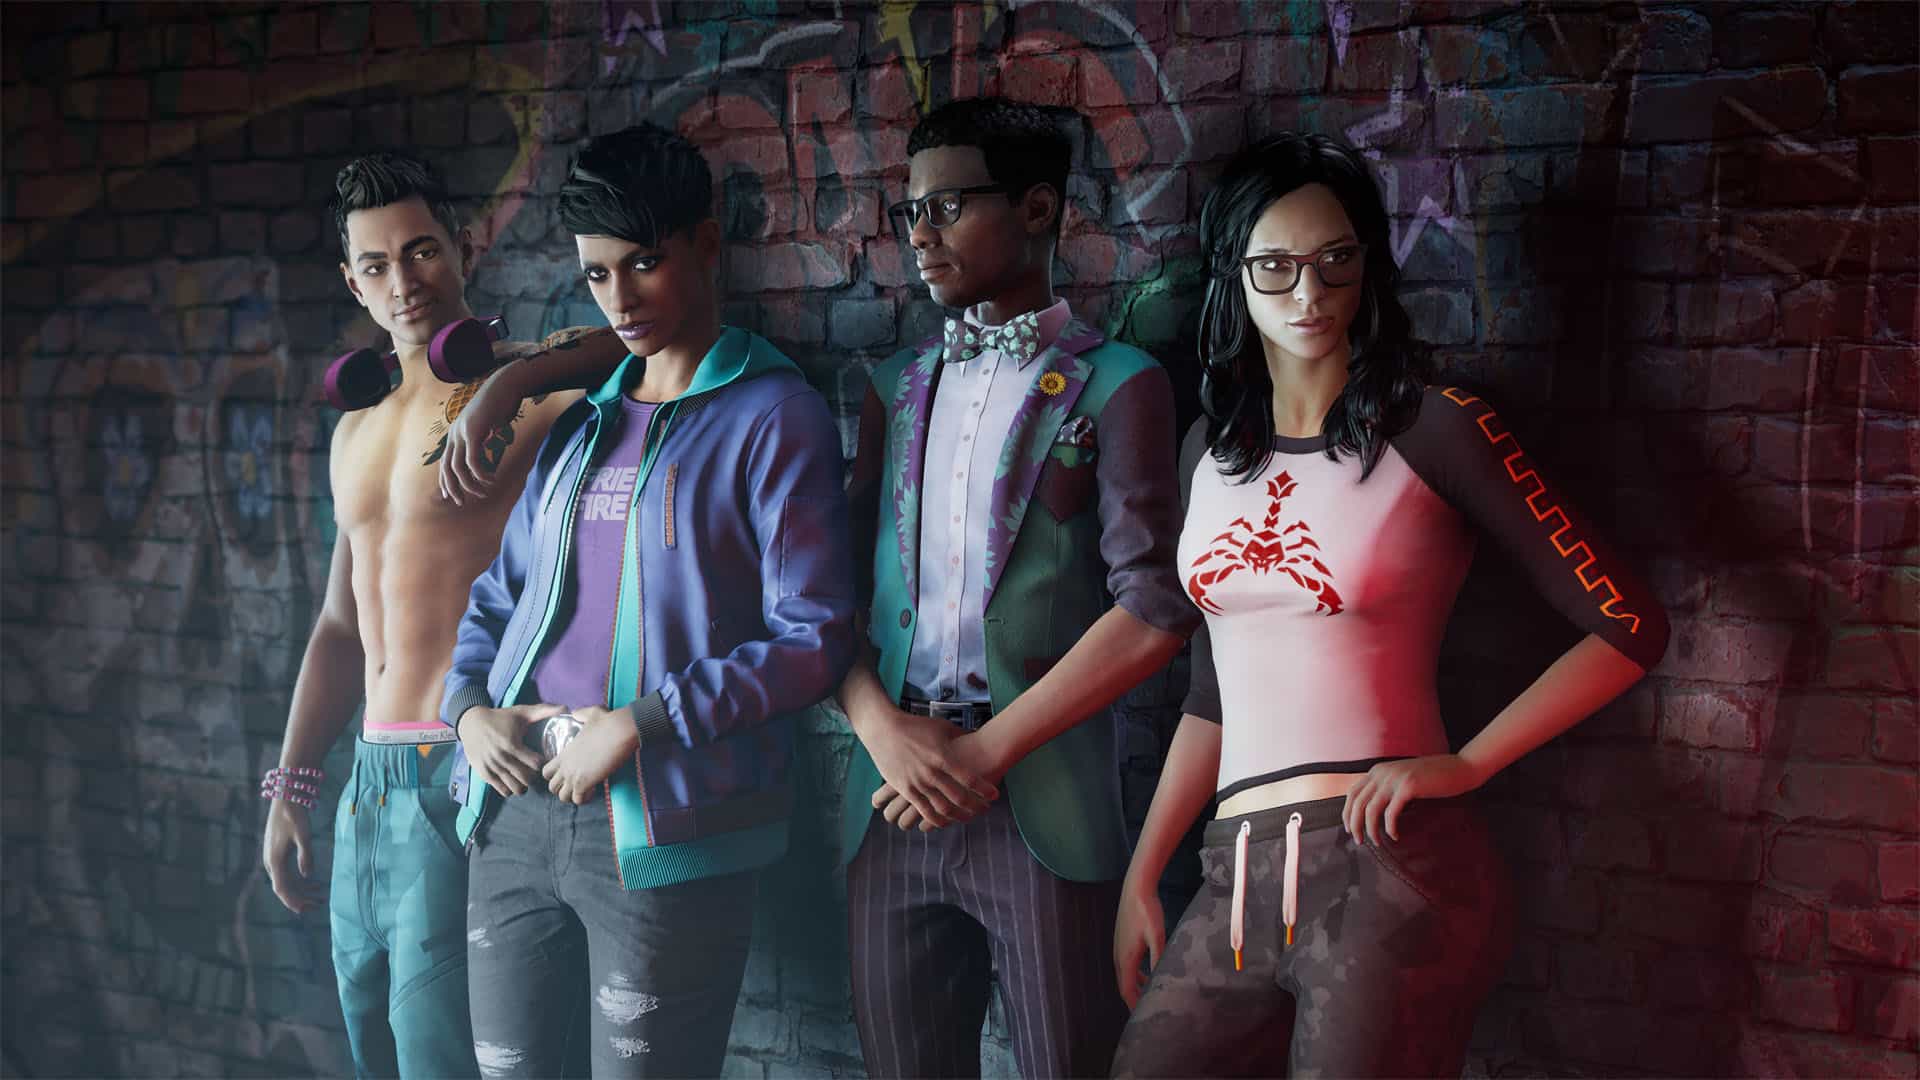 Saints Row reboot delayed to August 23 2022